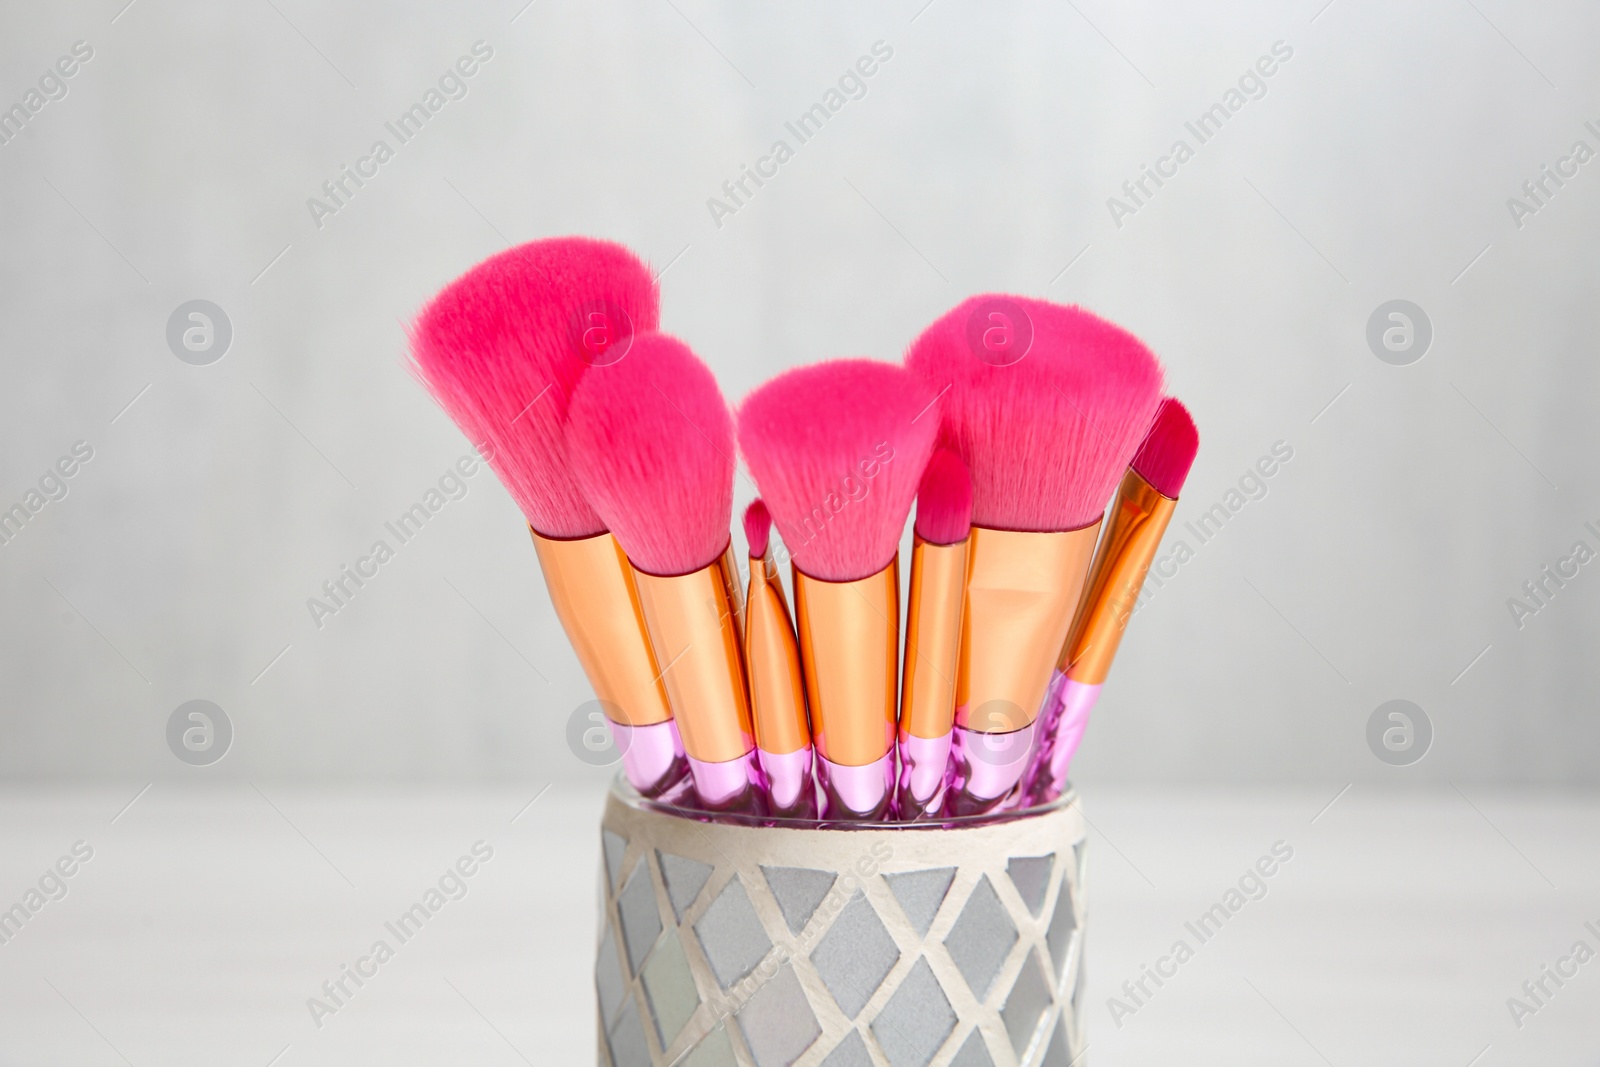 Photo of Organizer with professional makeup brushes against light background